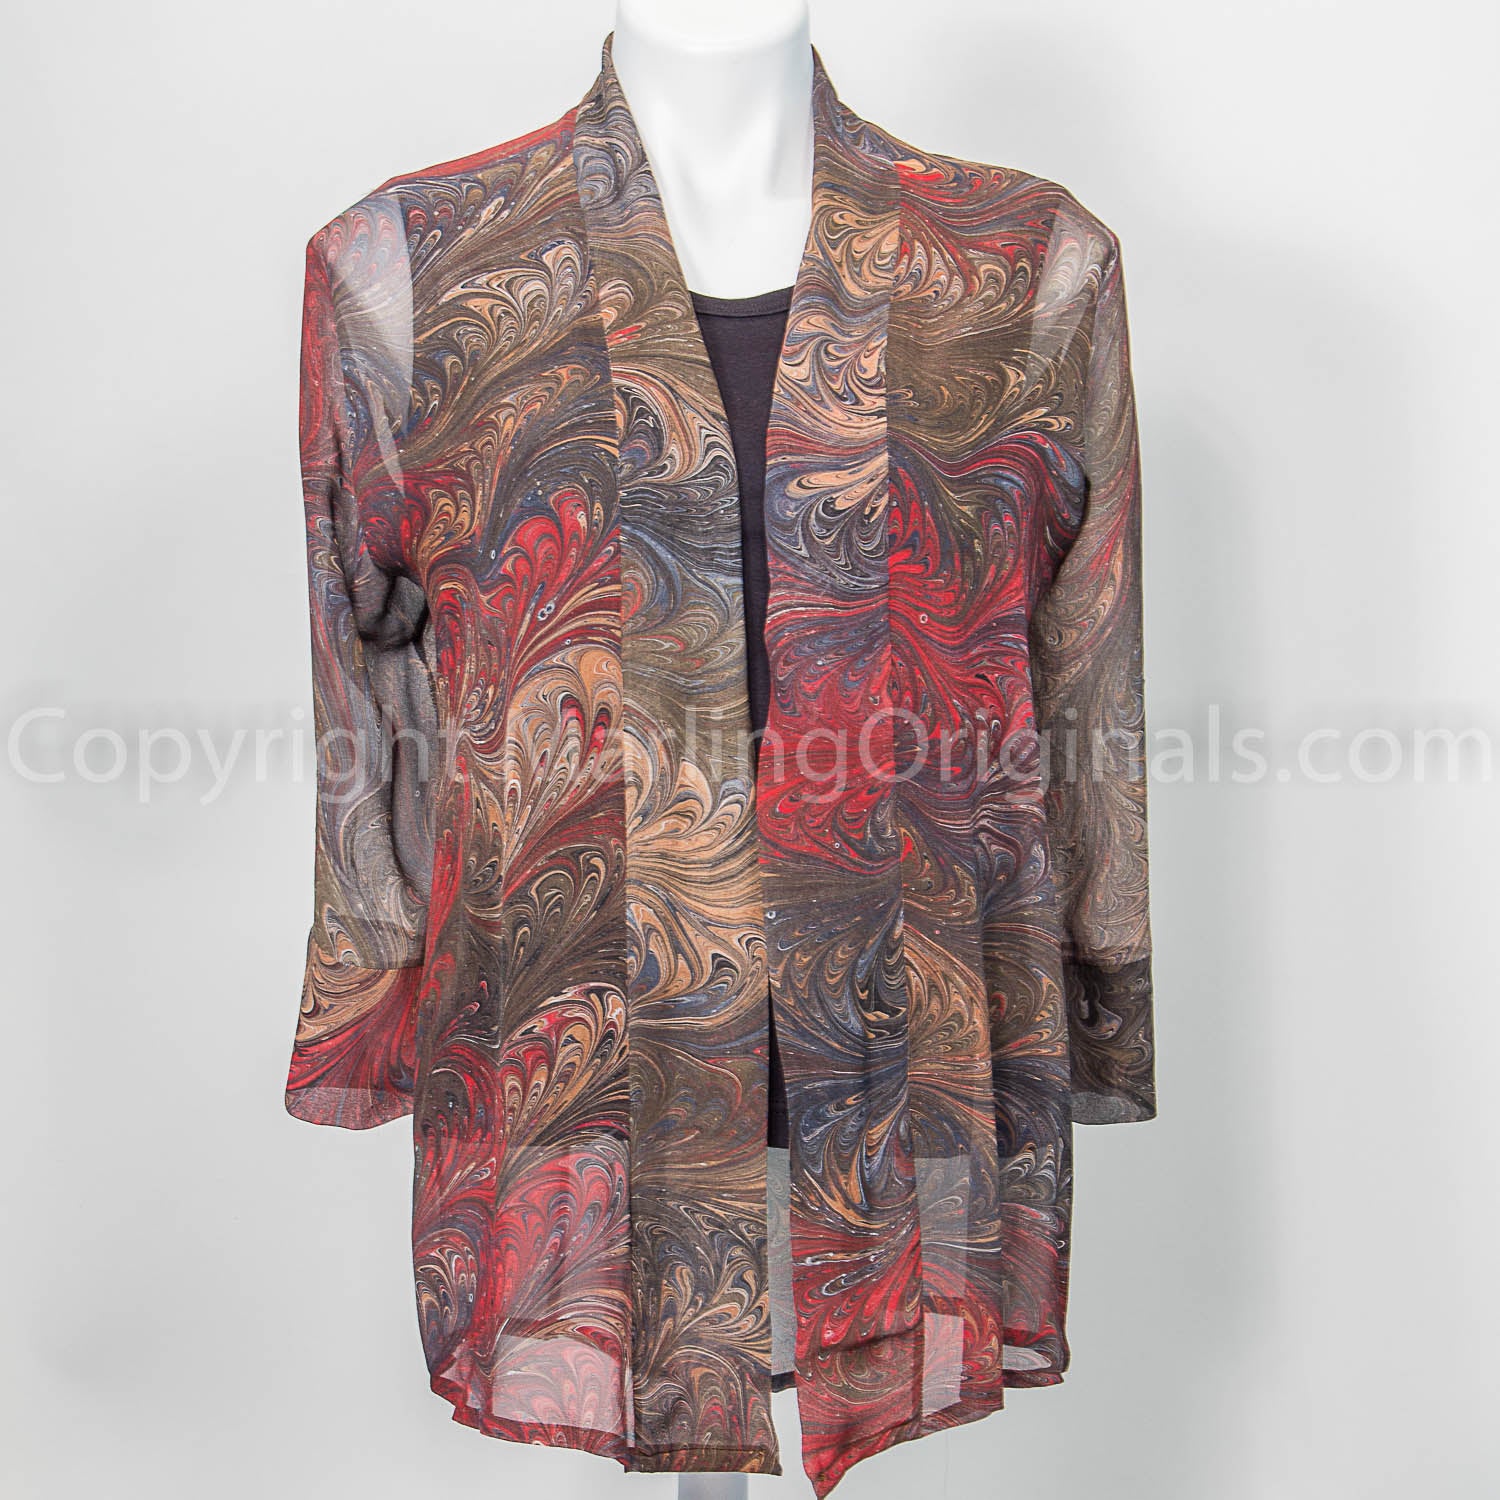 marbled silk chiffon jacket in deep brown, charcoals and red.  Kimono style with 3/4 length sleeves